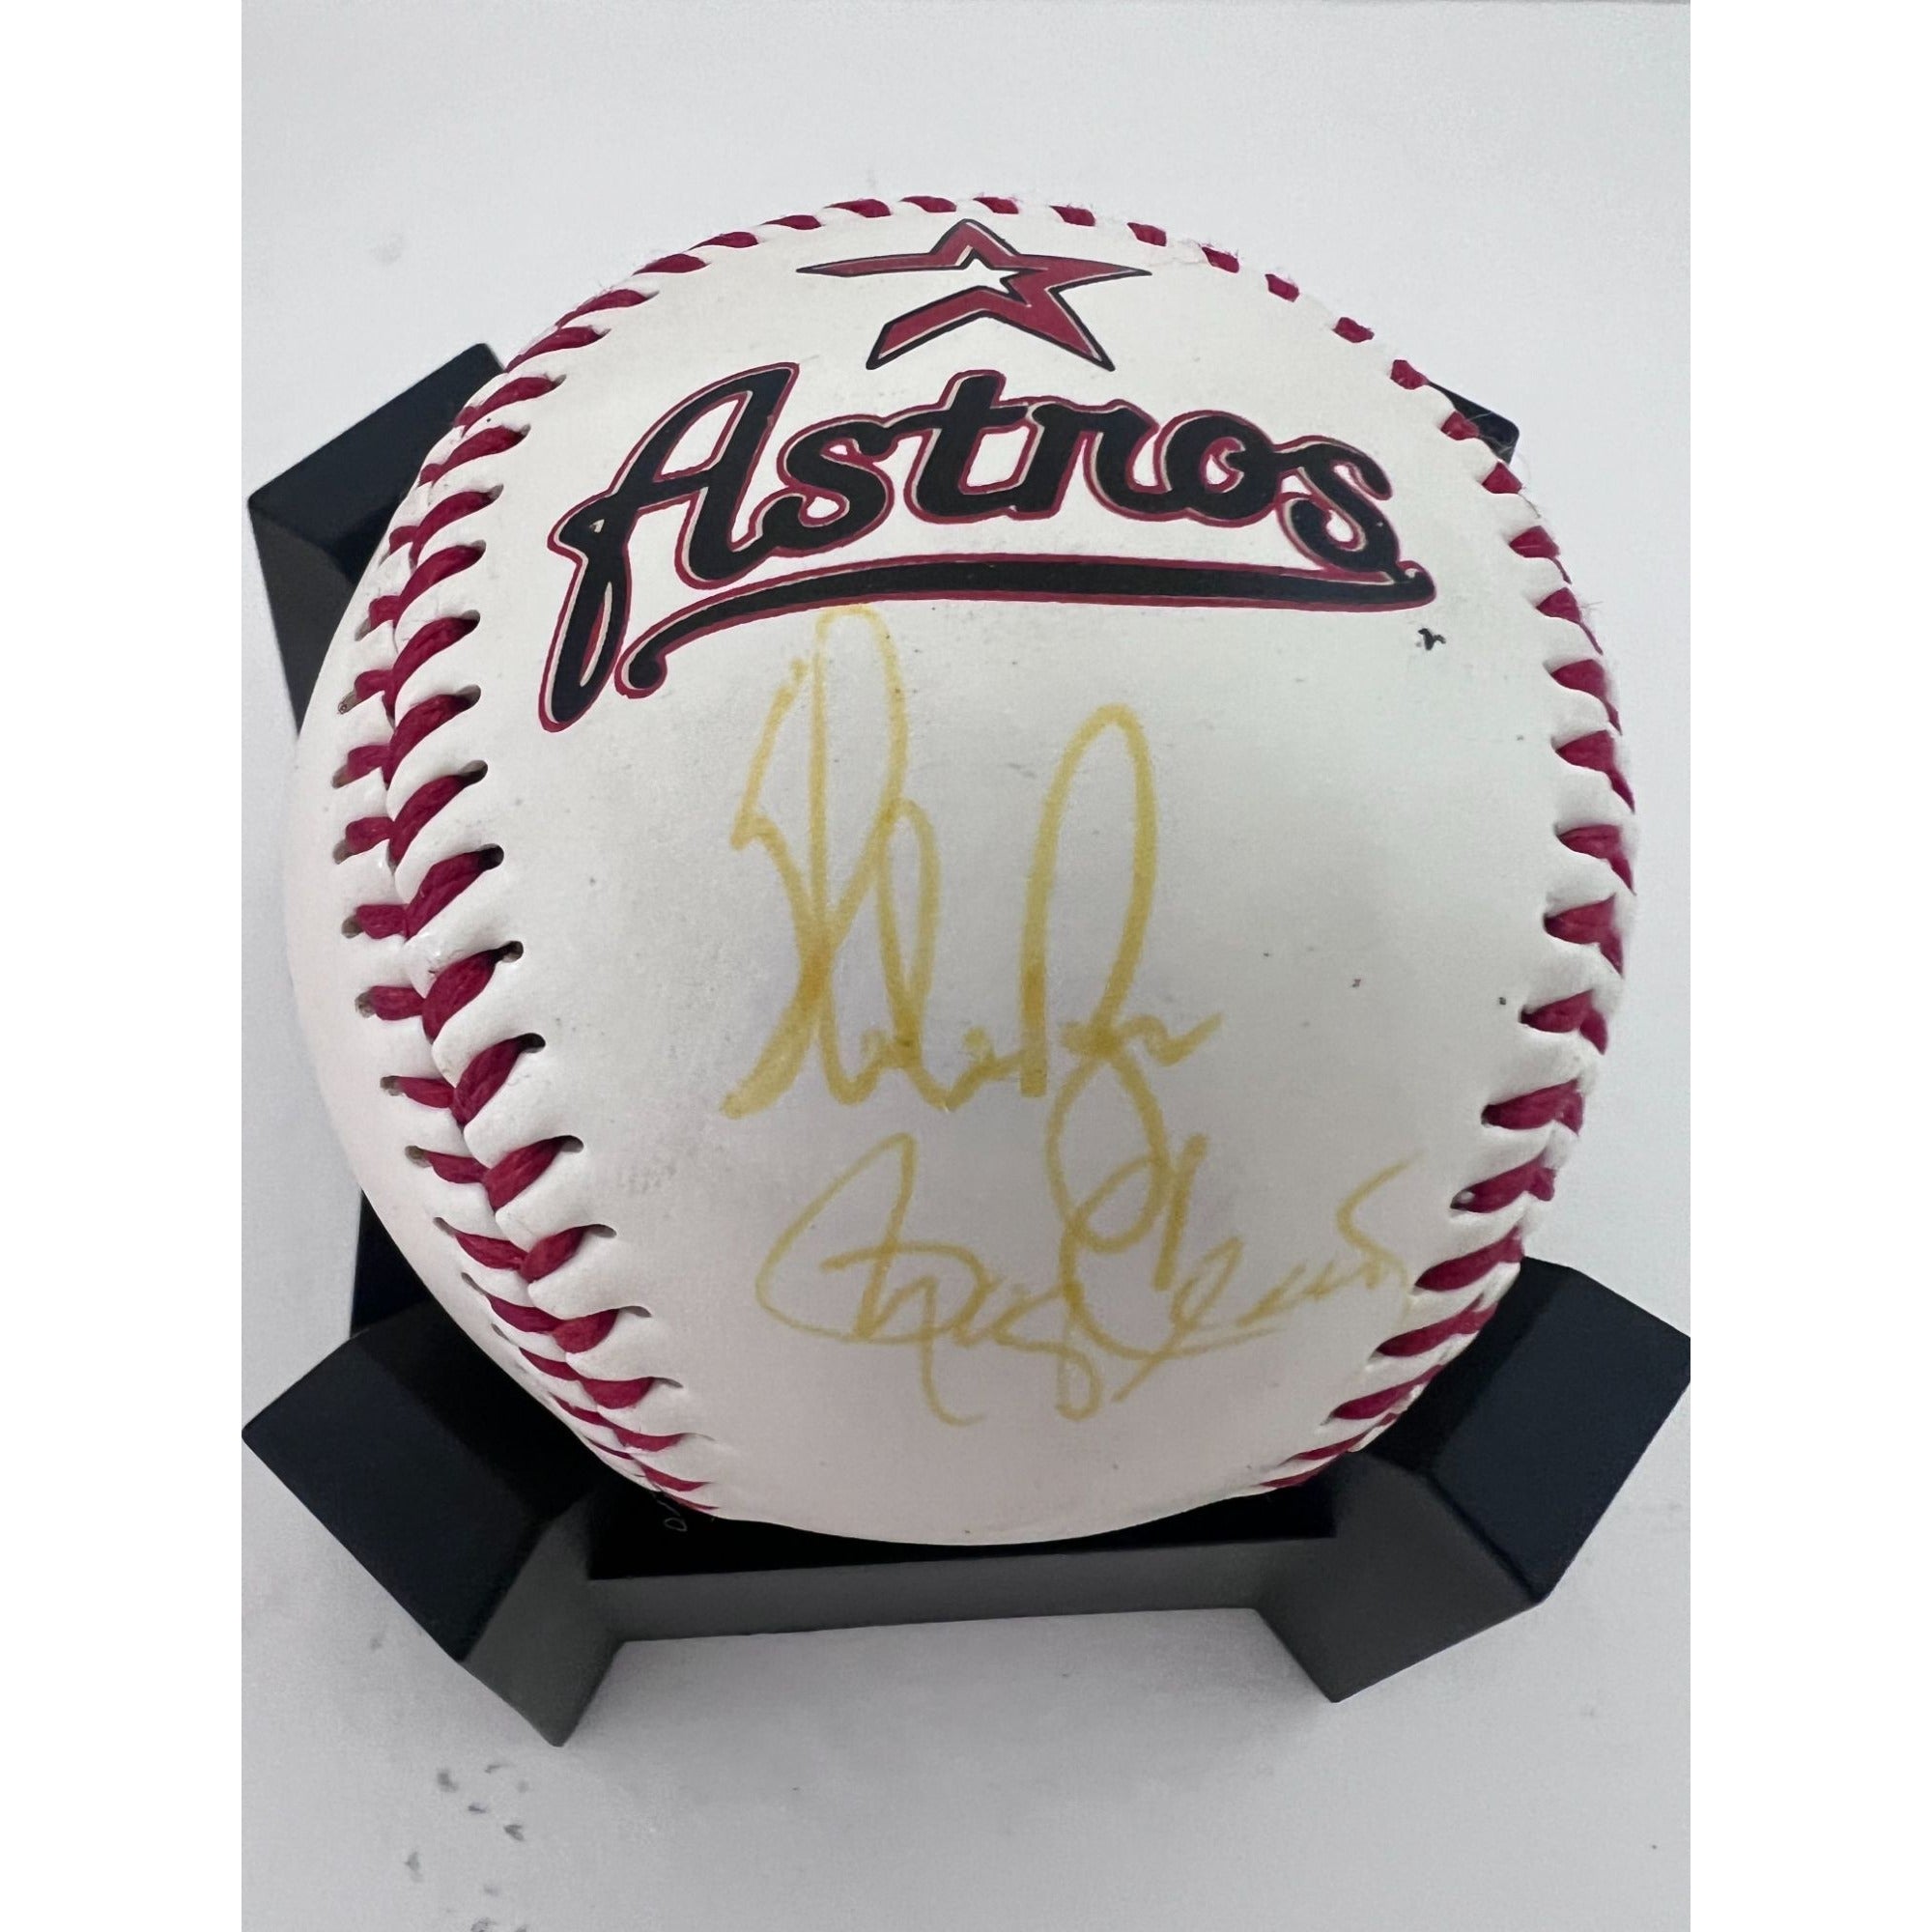 Houston Astros Nolan Ryan and Roger Clemens baseball signed with proof